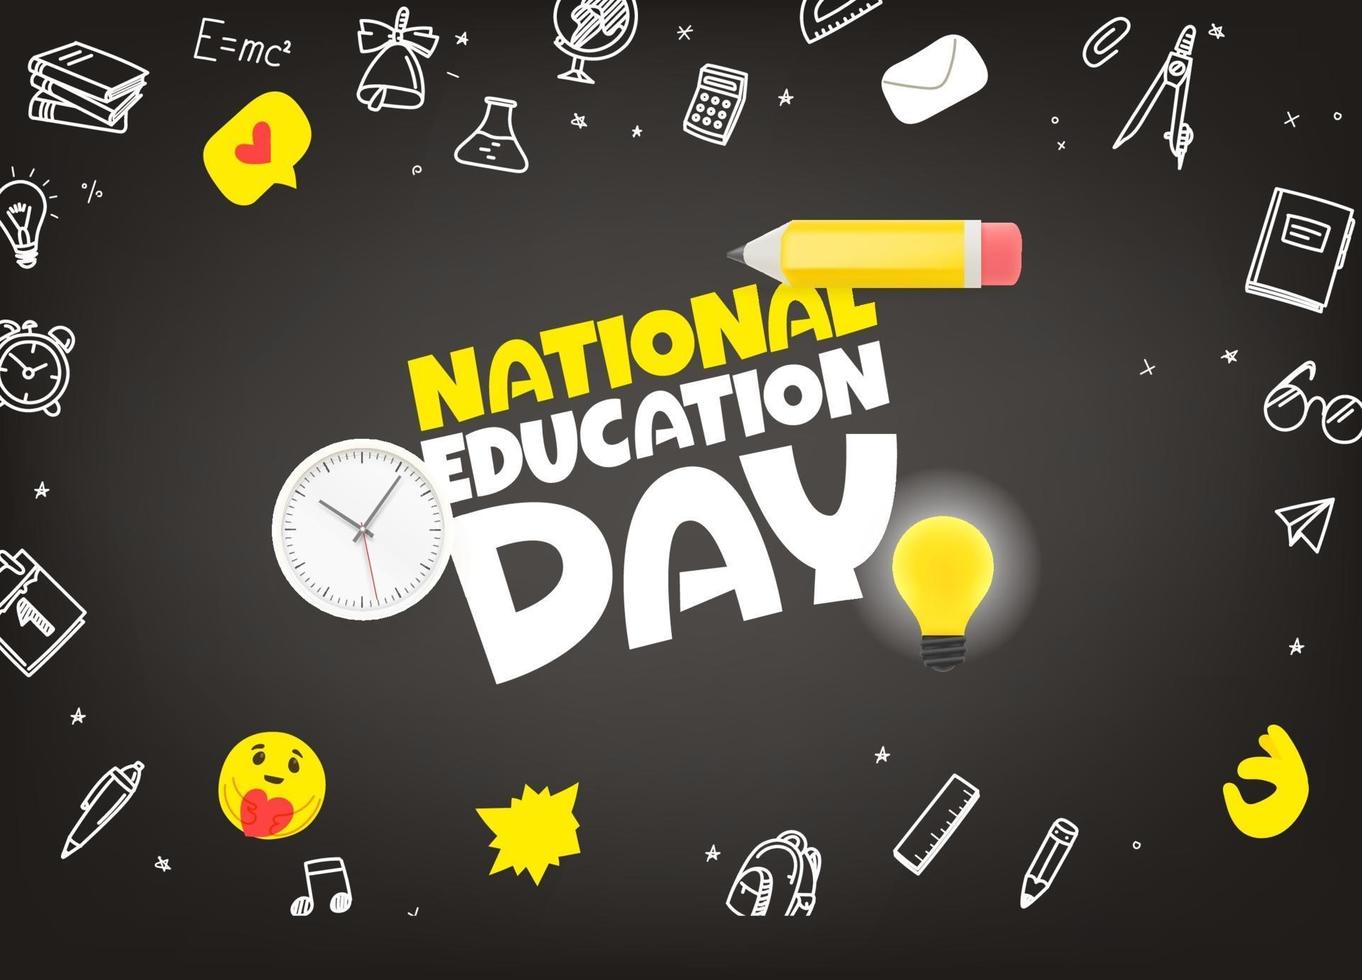 National Education Day today